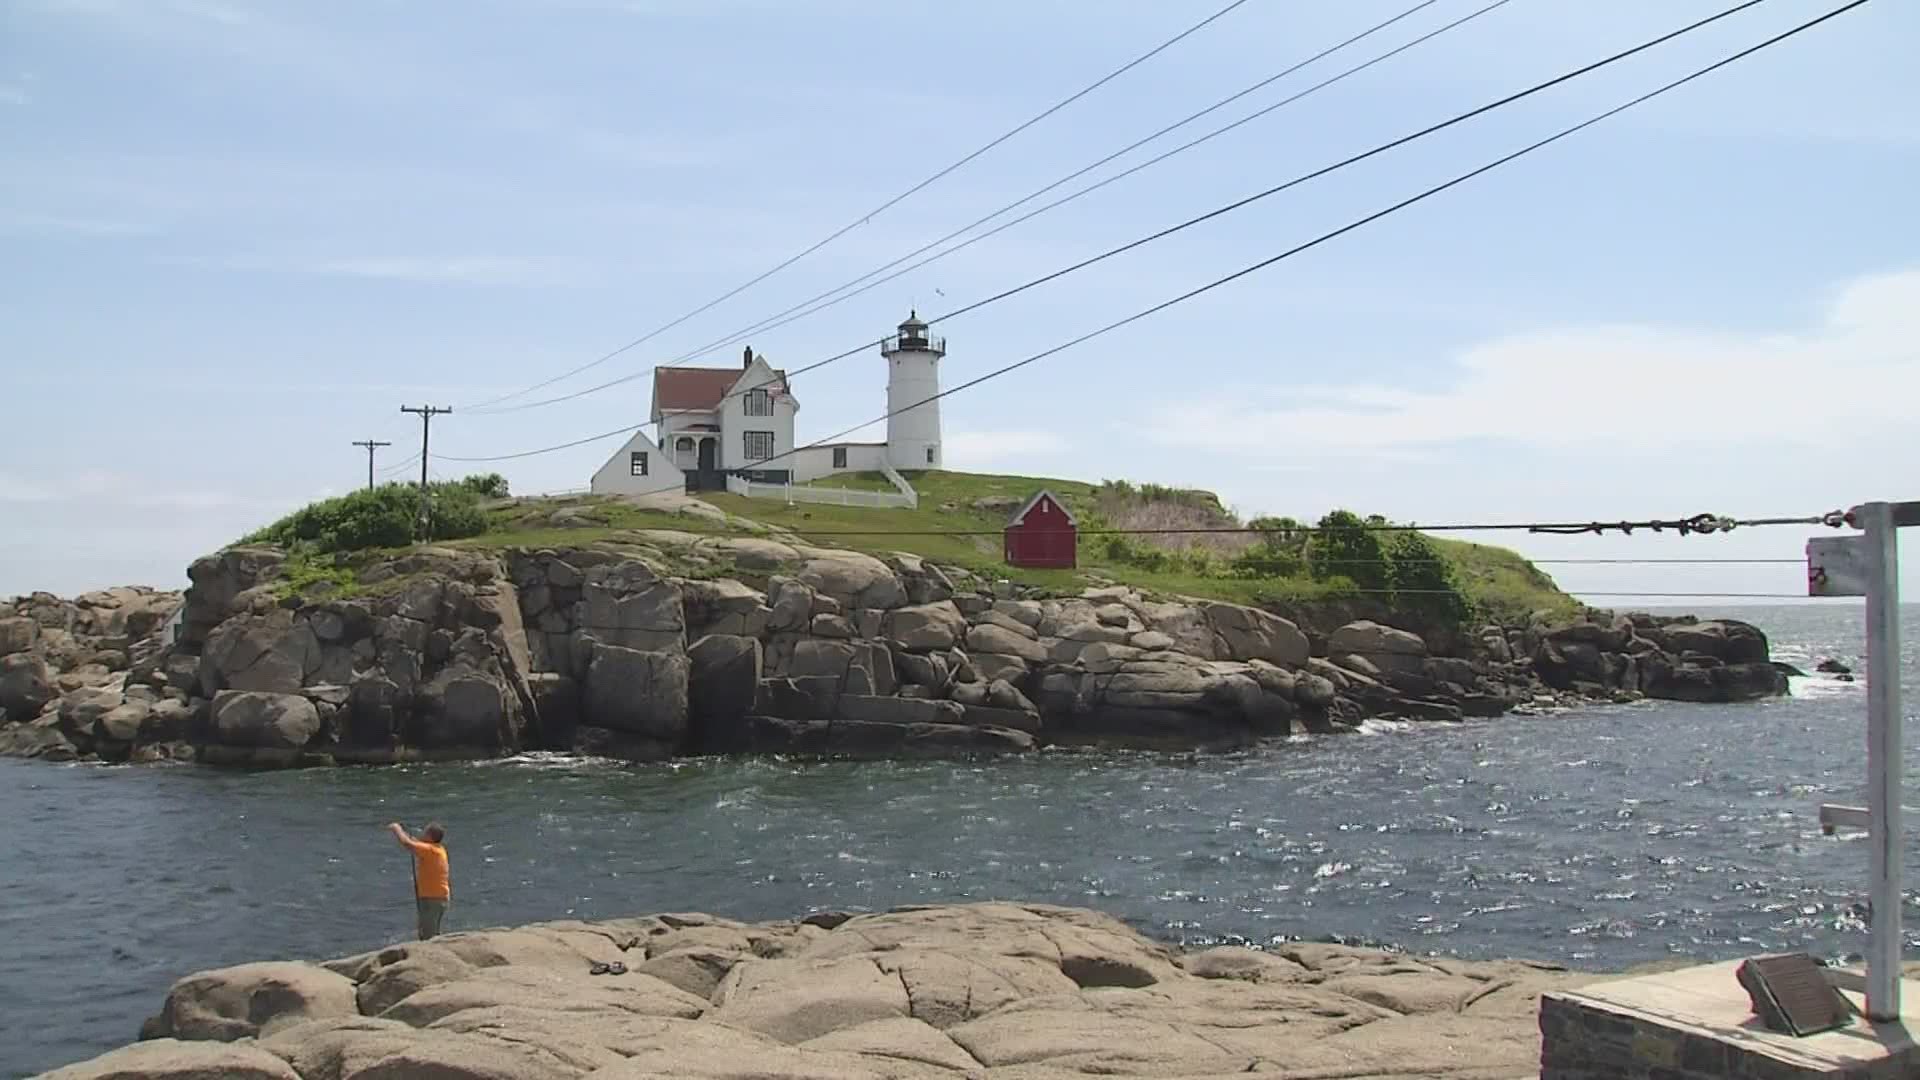 Diver found dead in water off Nubble Light, York police say